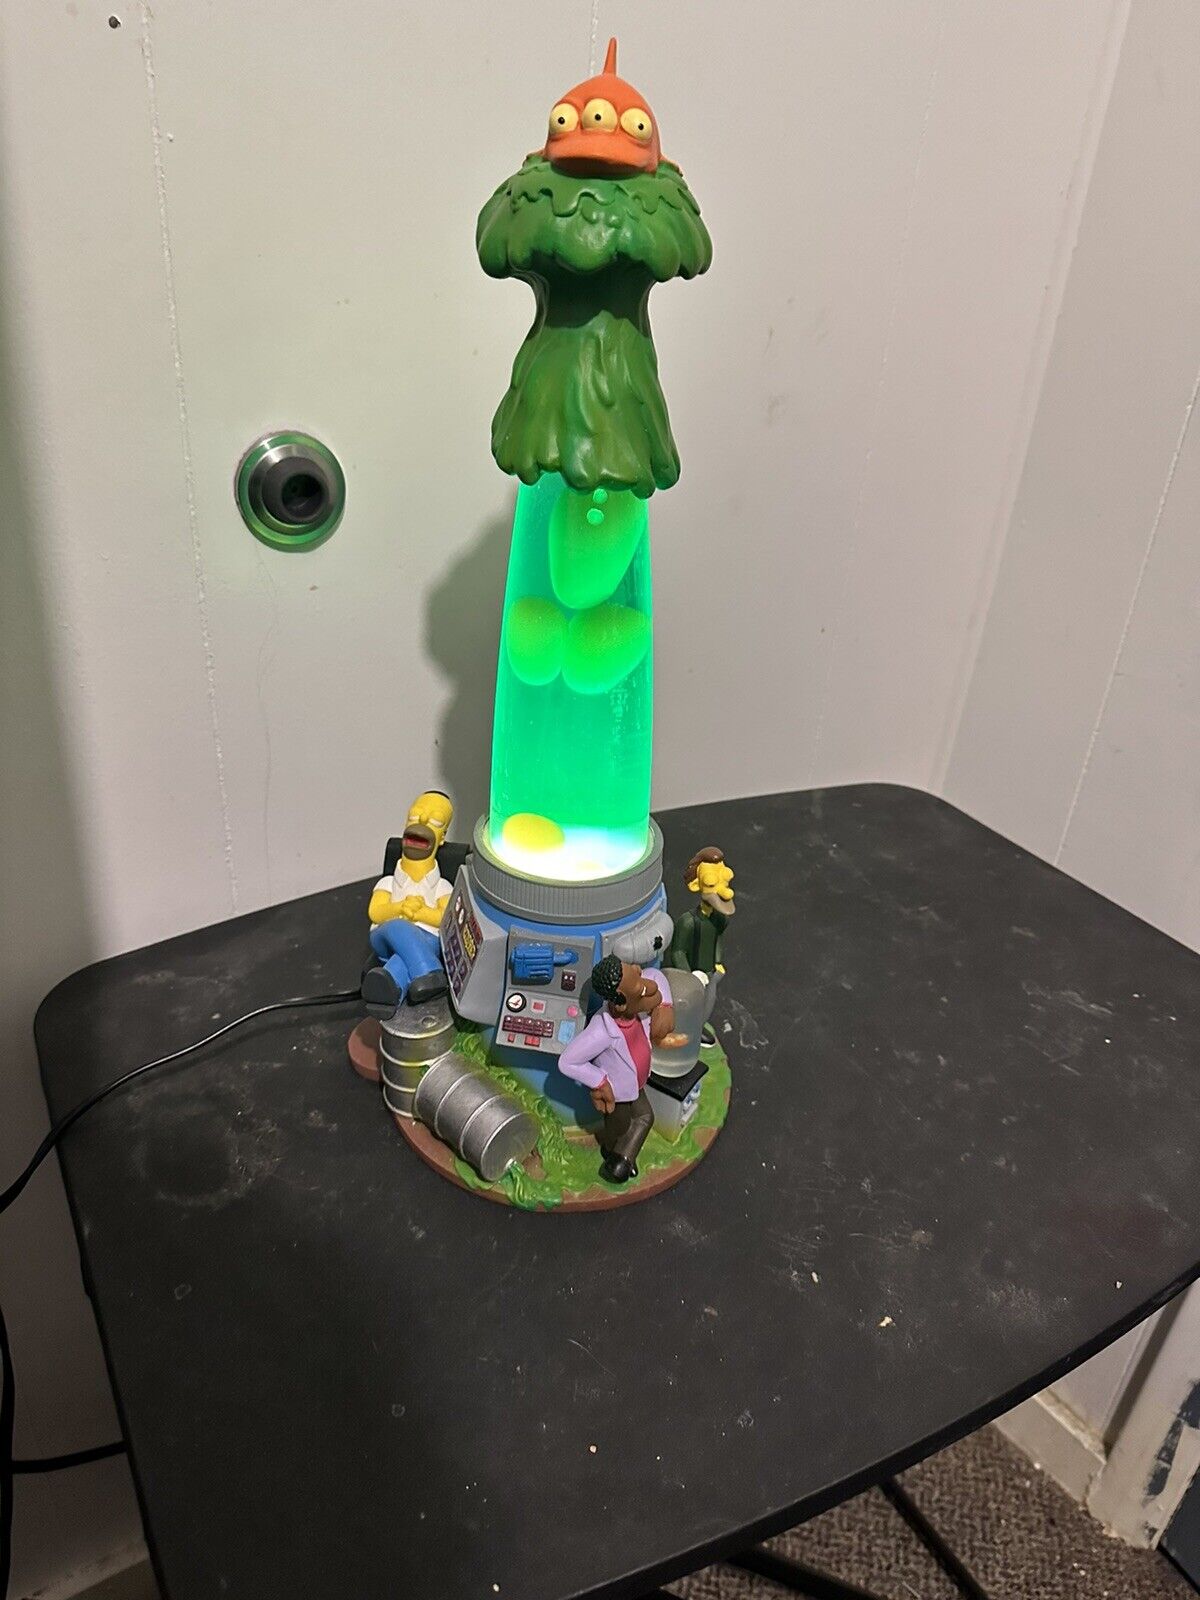 * NECA THE SIMPSONS MOTION LAMP LAVA 2003 HOMER LENNY AND CARL